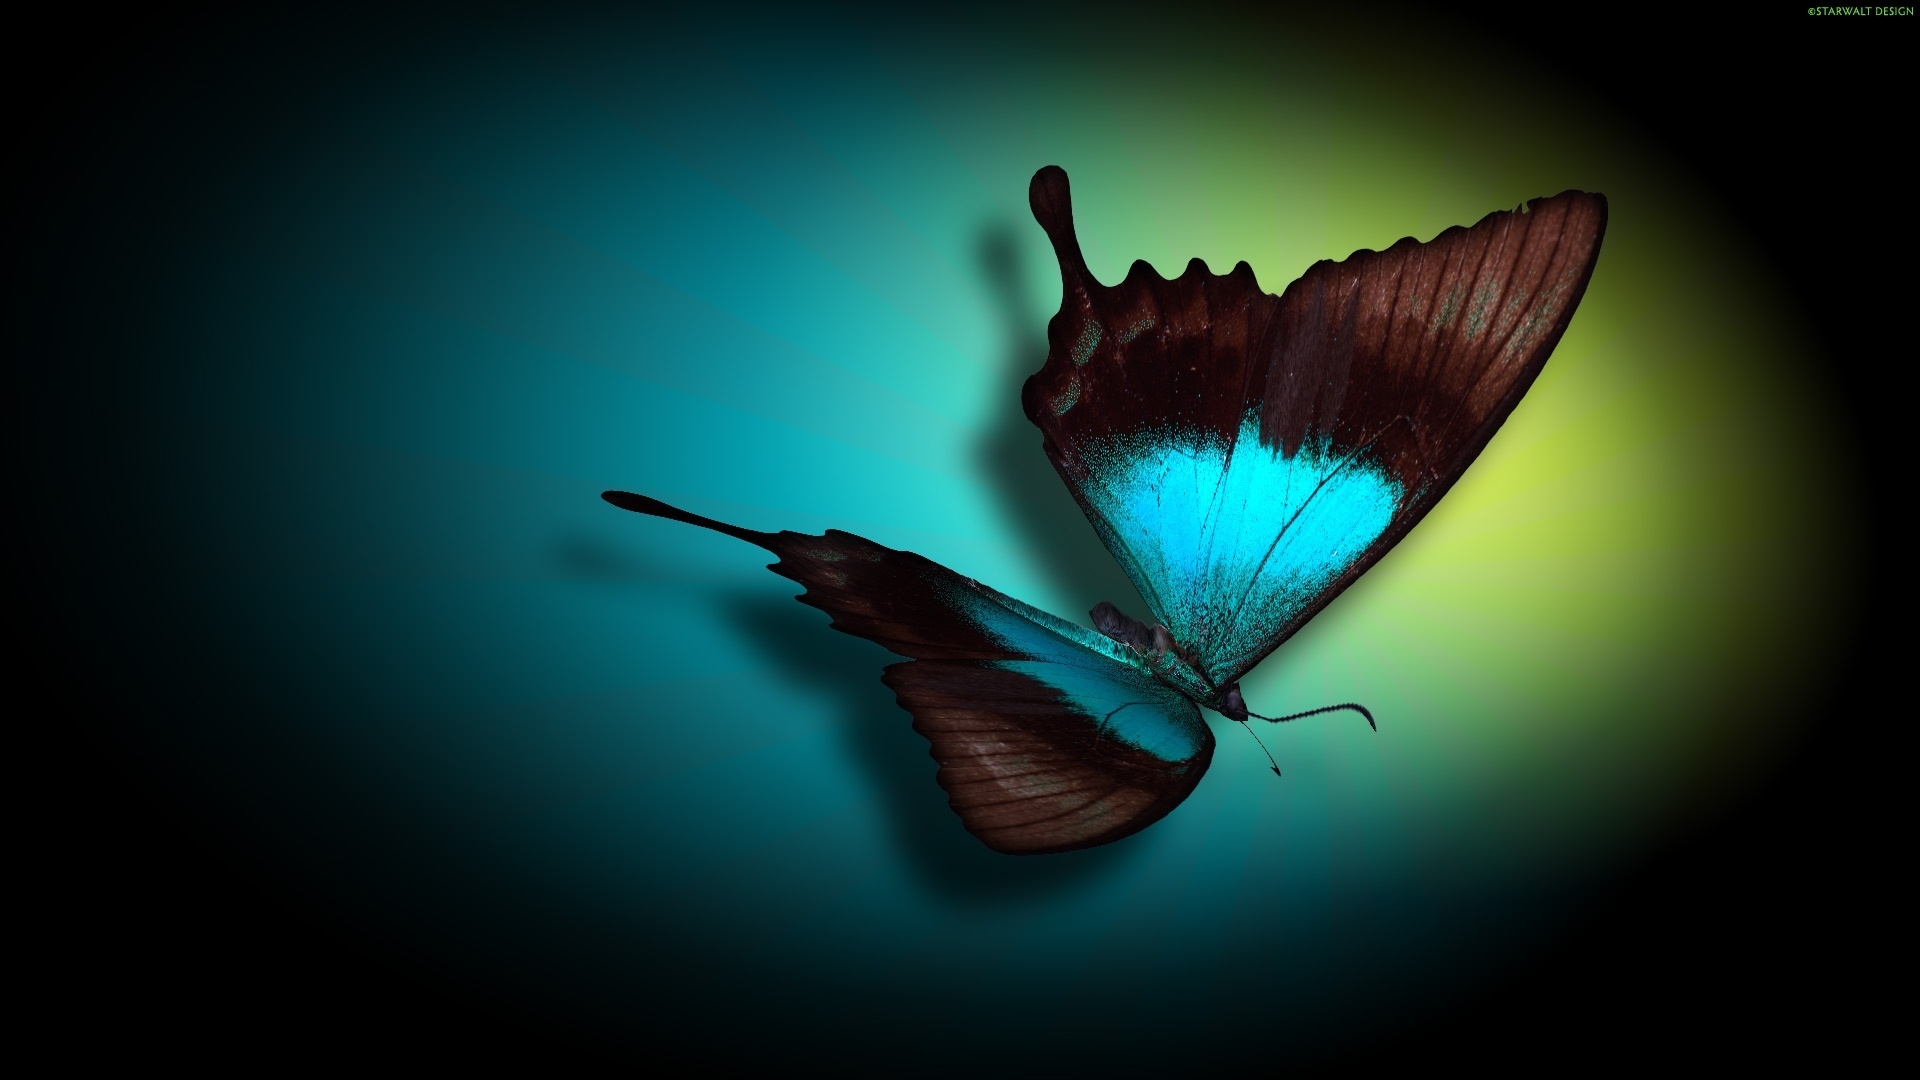 46903 download wallpaper butterflies, insects, pictures screensavers and pictures for free